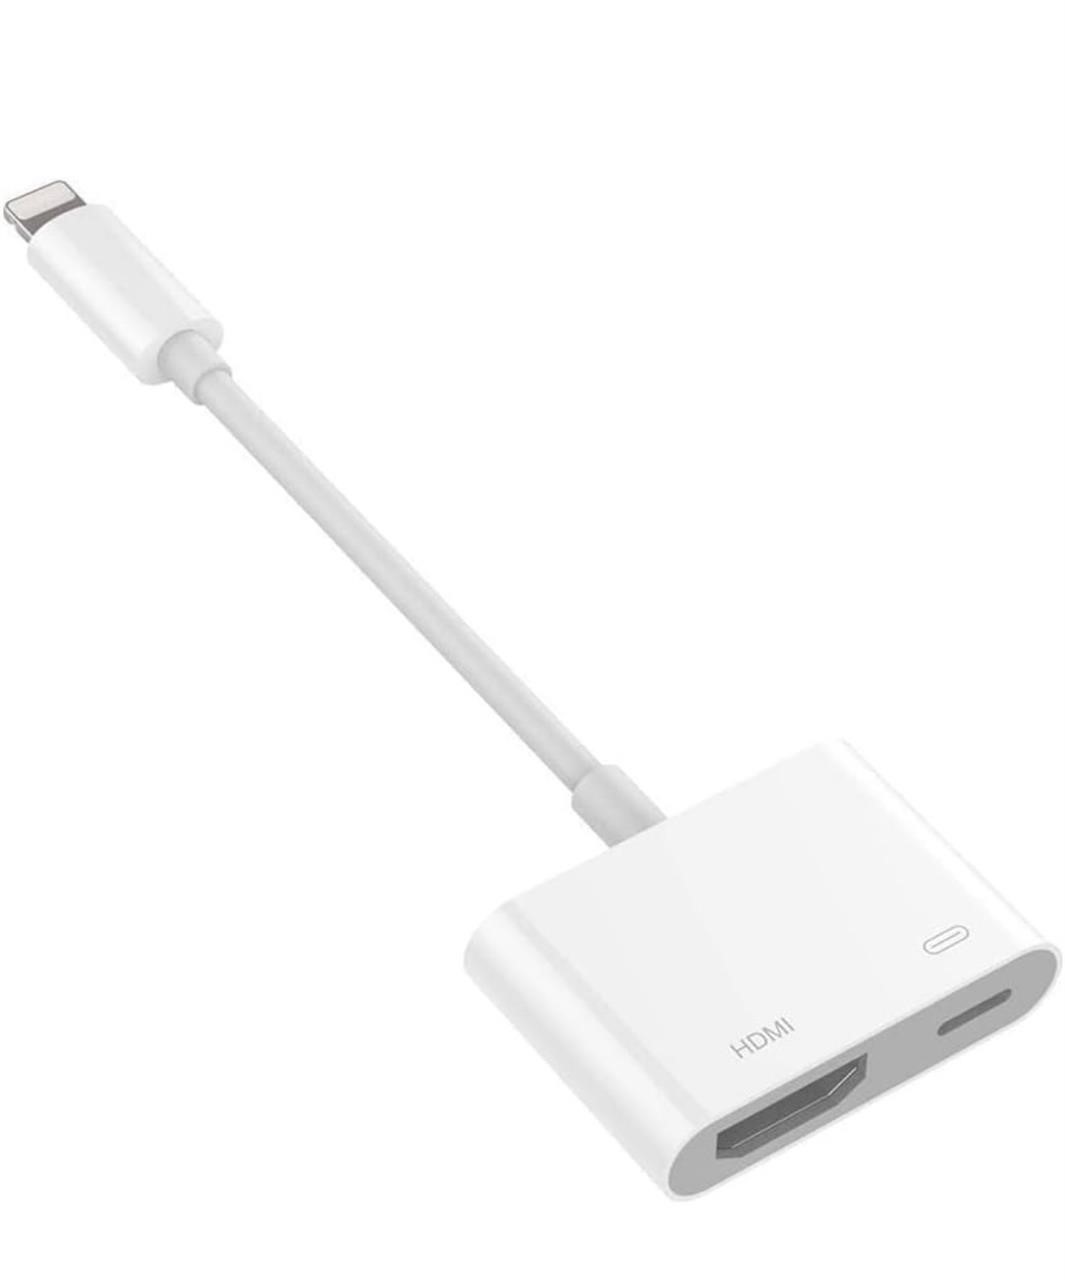 NEW HDMI Adapter for iPhone